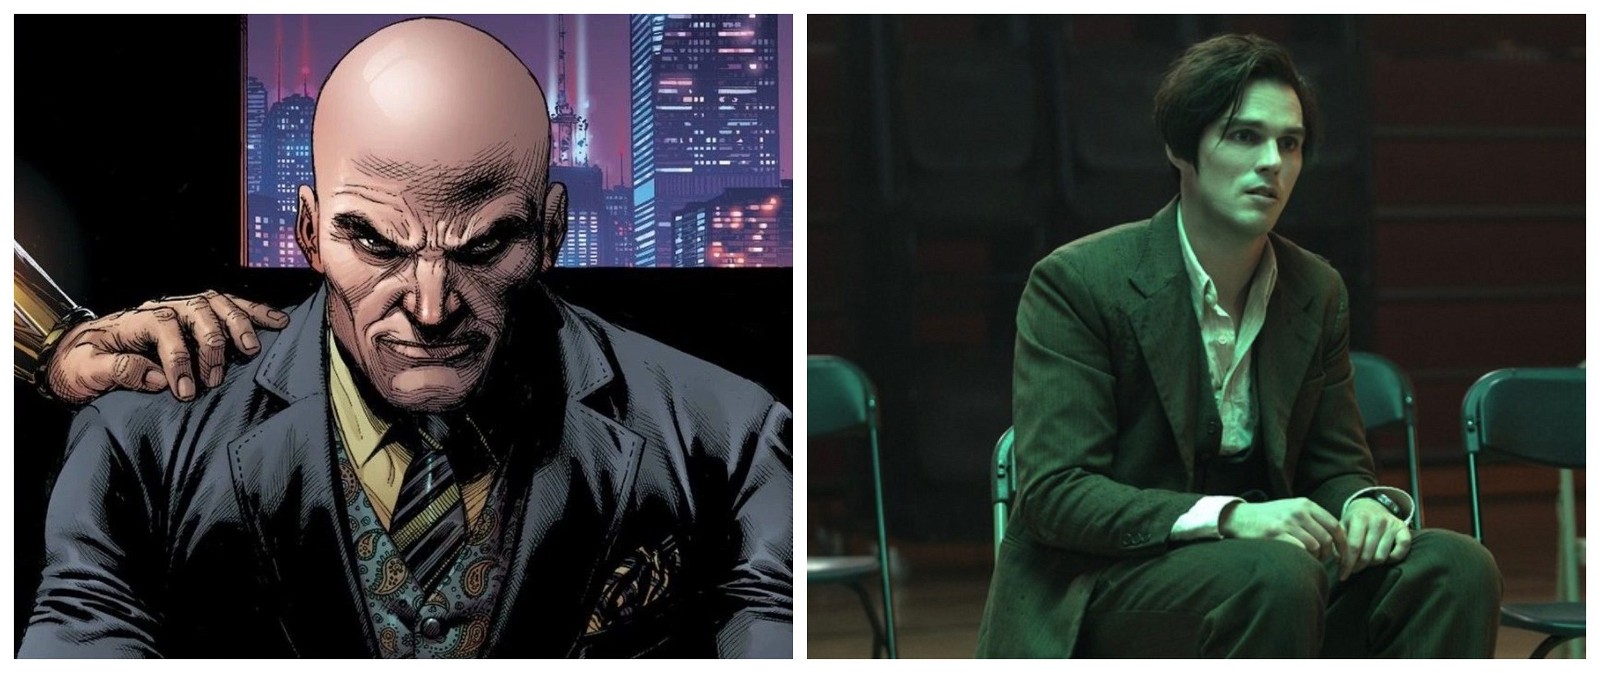 Lex Luther in DC Comics and Nicholas Hoult as R.M. Renfield in Renfield